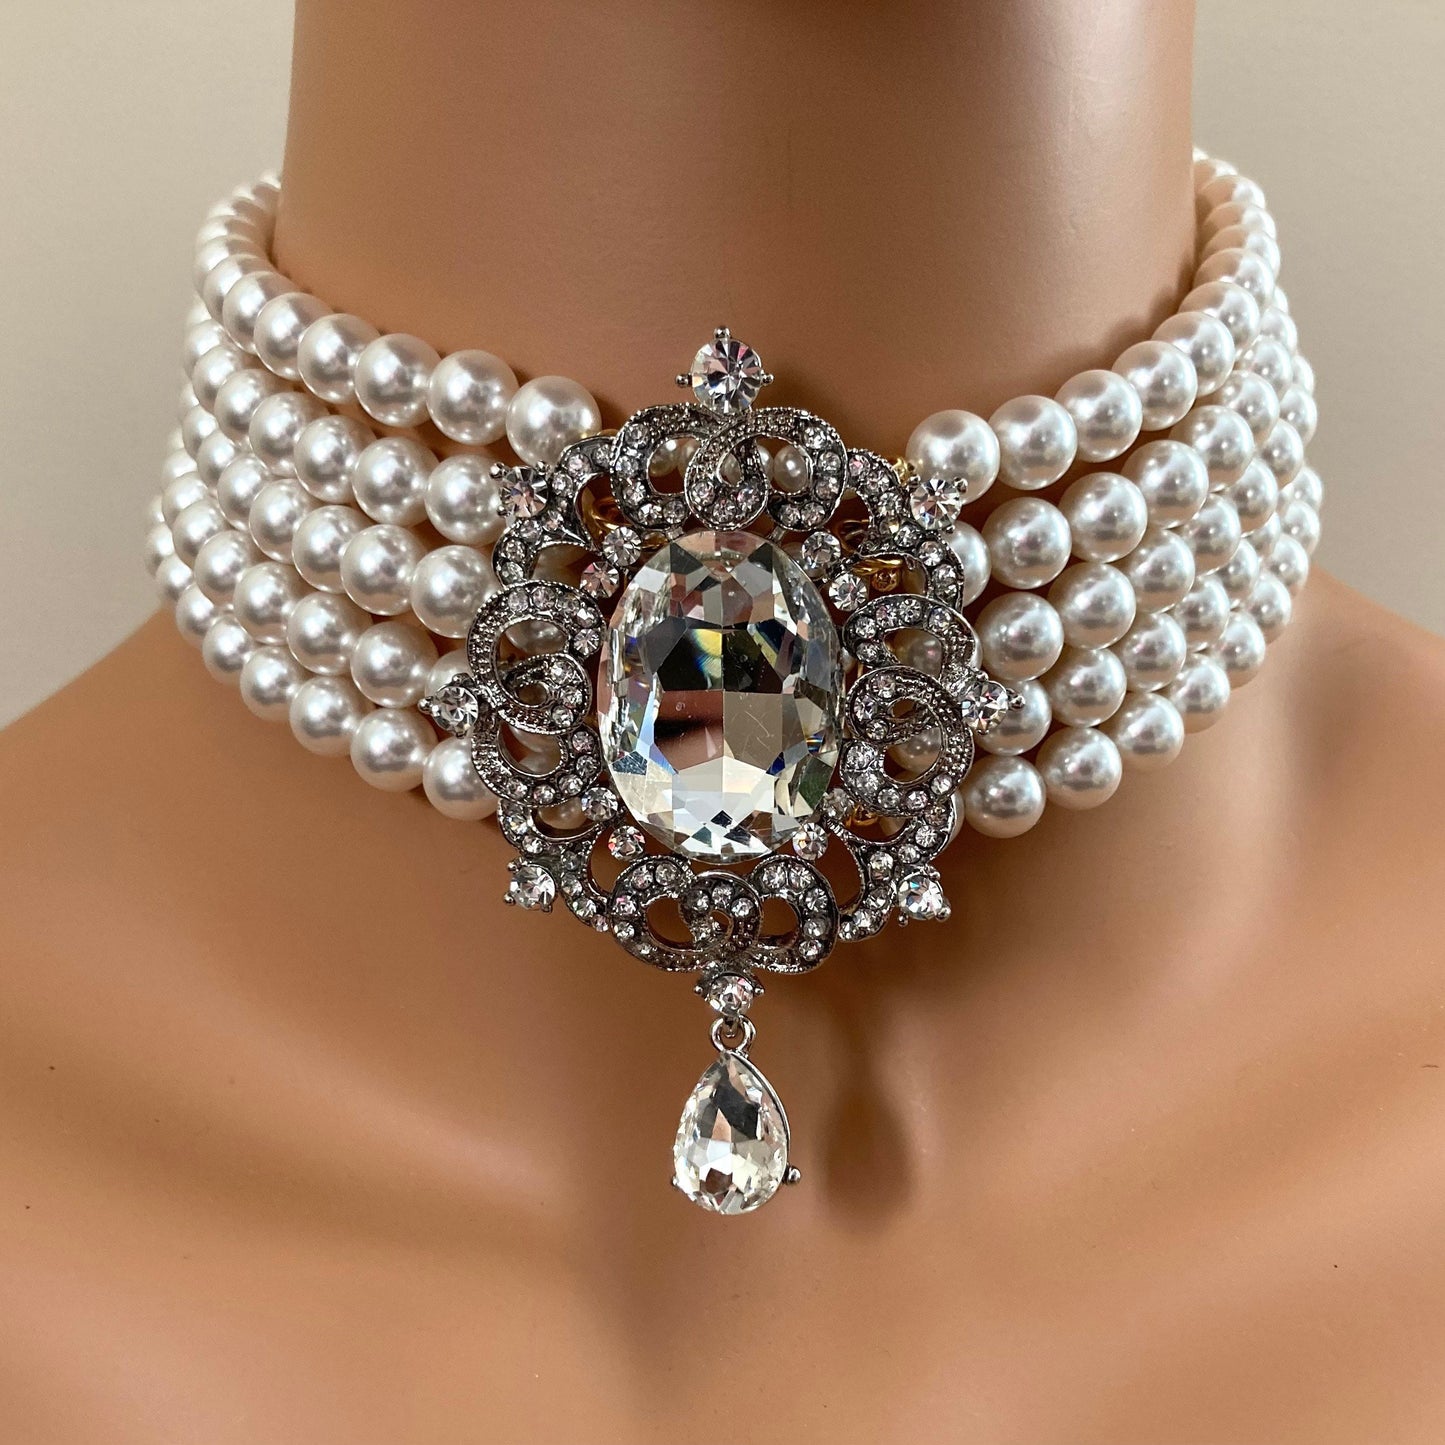 Pearl Choker Necklace with silver Rhinestone Brooch focal 5 strands layered White Crystal Pearls with Backdrop Extender wedding jewelry